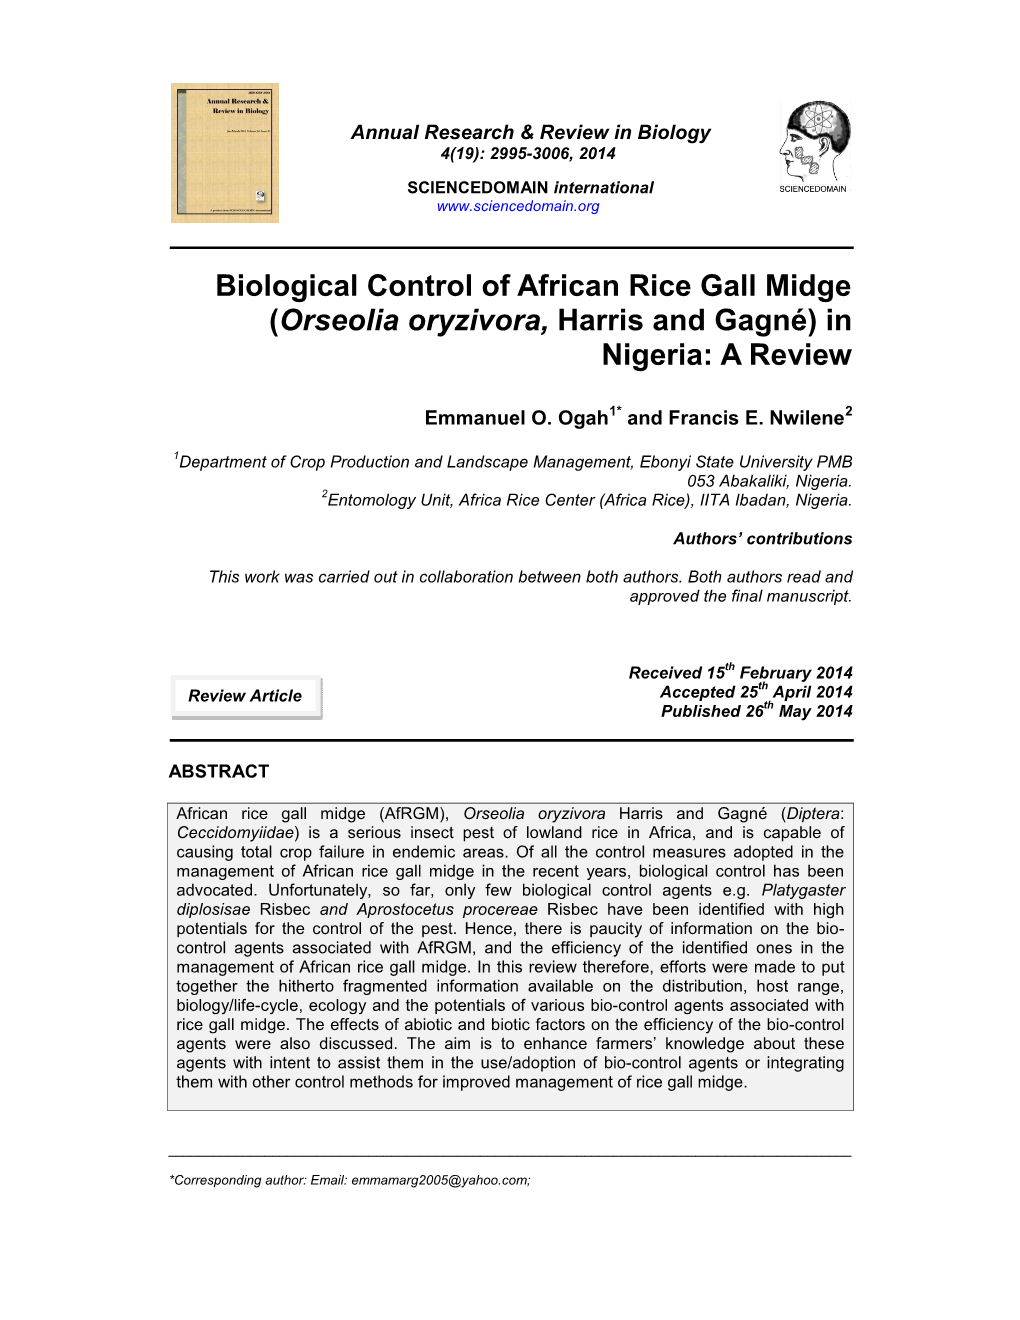 Biological Control of African Rice Gall Midge (Orseolia Oryzivora, Harris and Gagné) in Nigeria: a Review